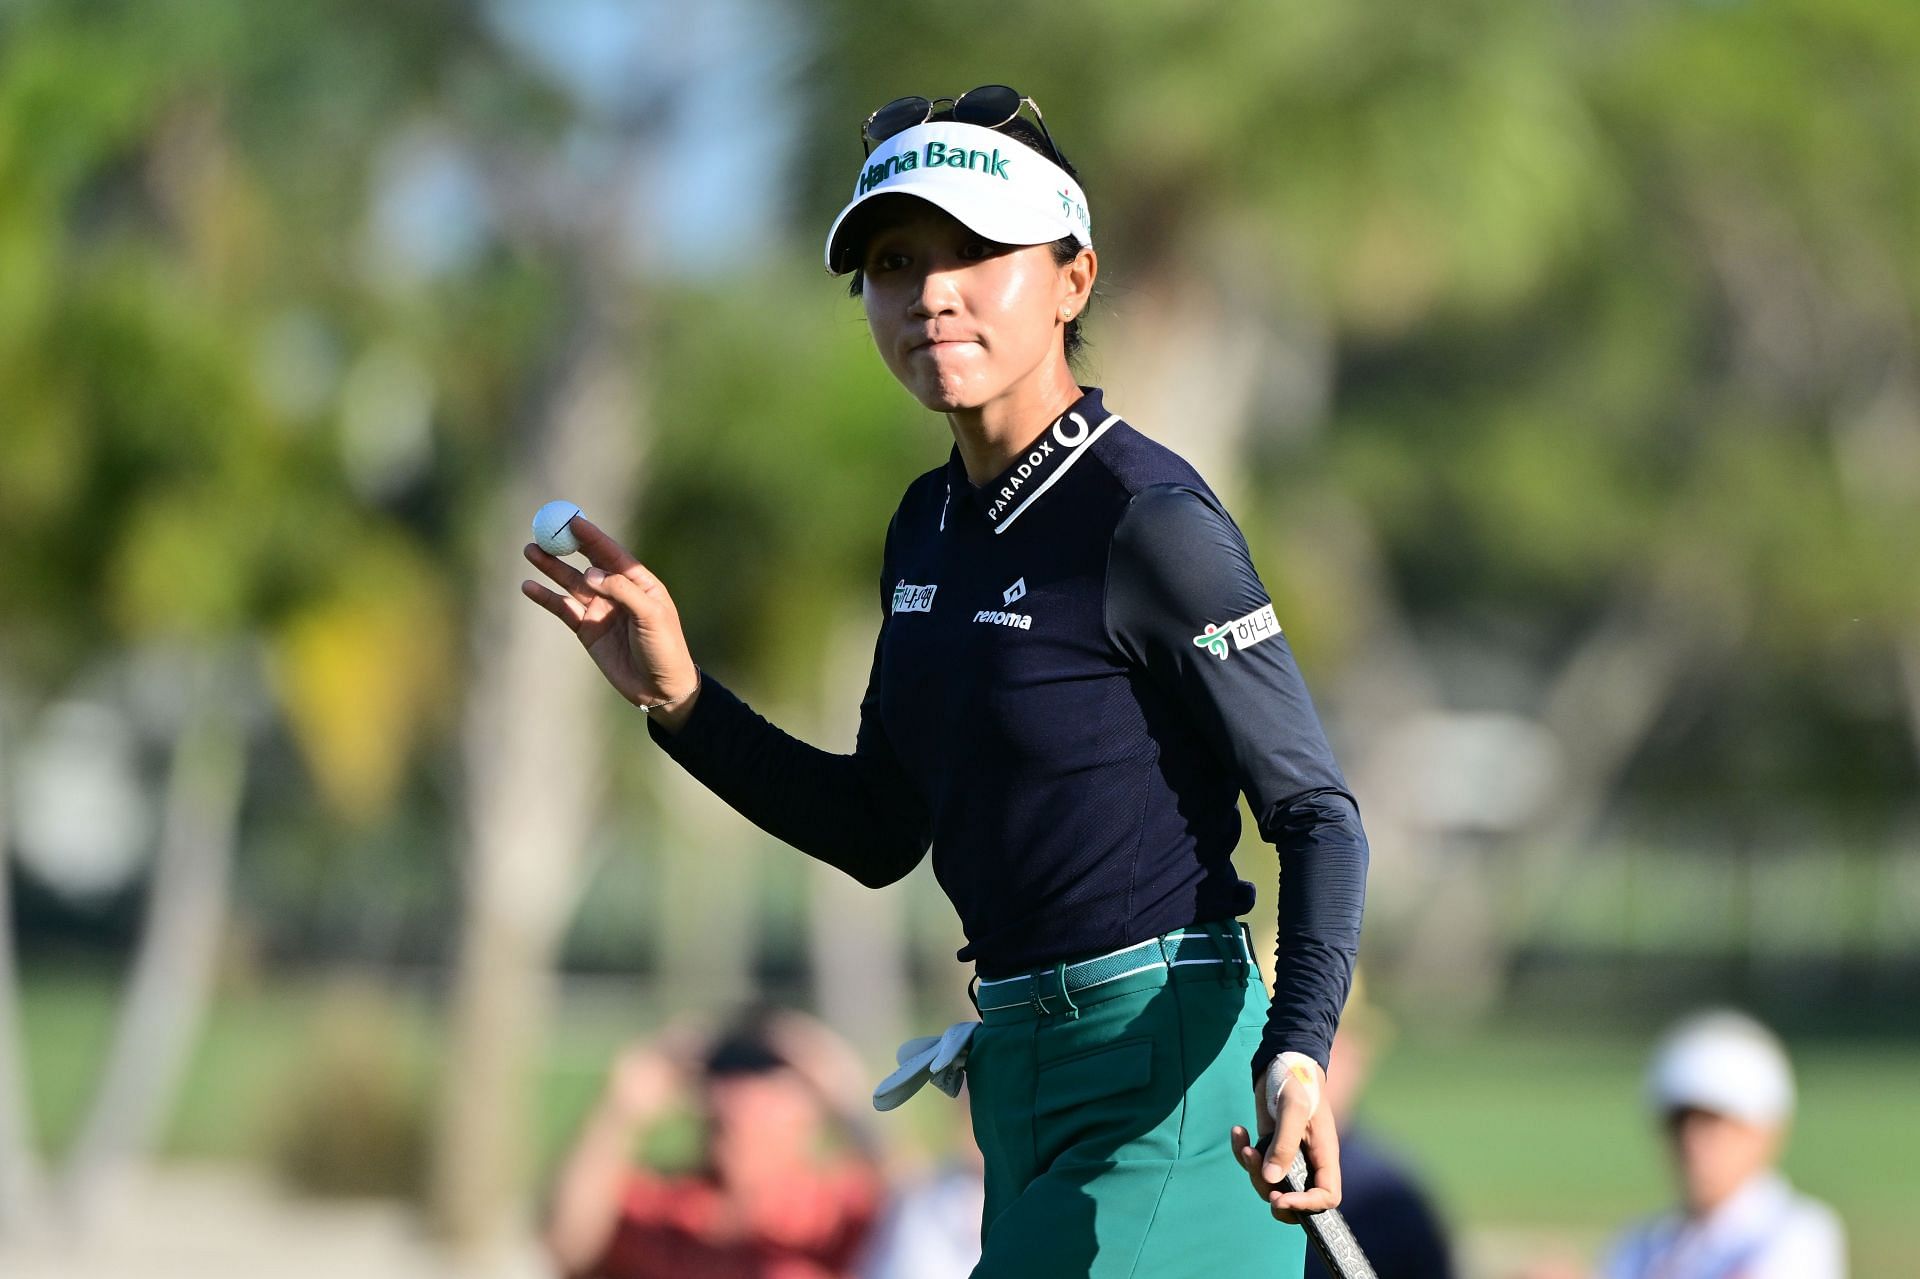 Lydia Ko is at joint thrid at the LPGA Drive-On Championship after three rounds